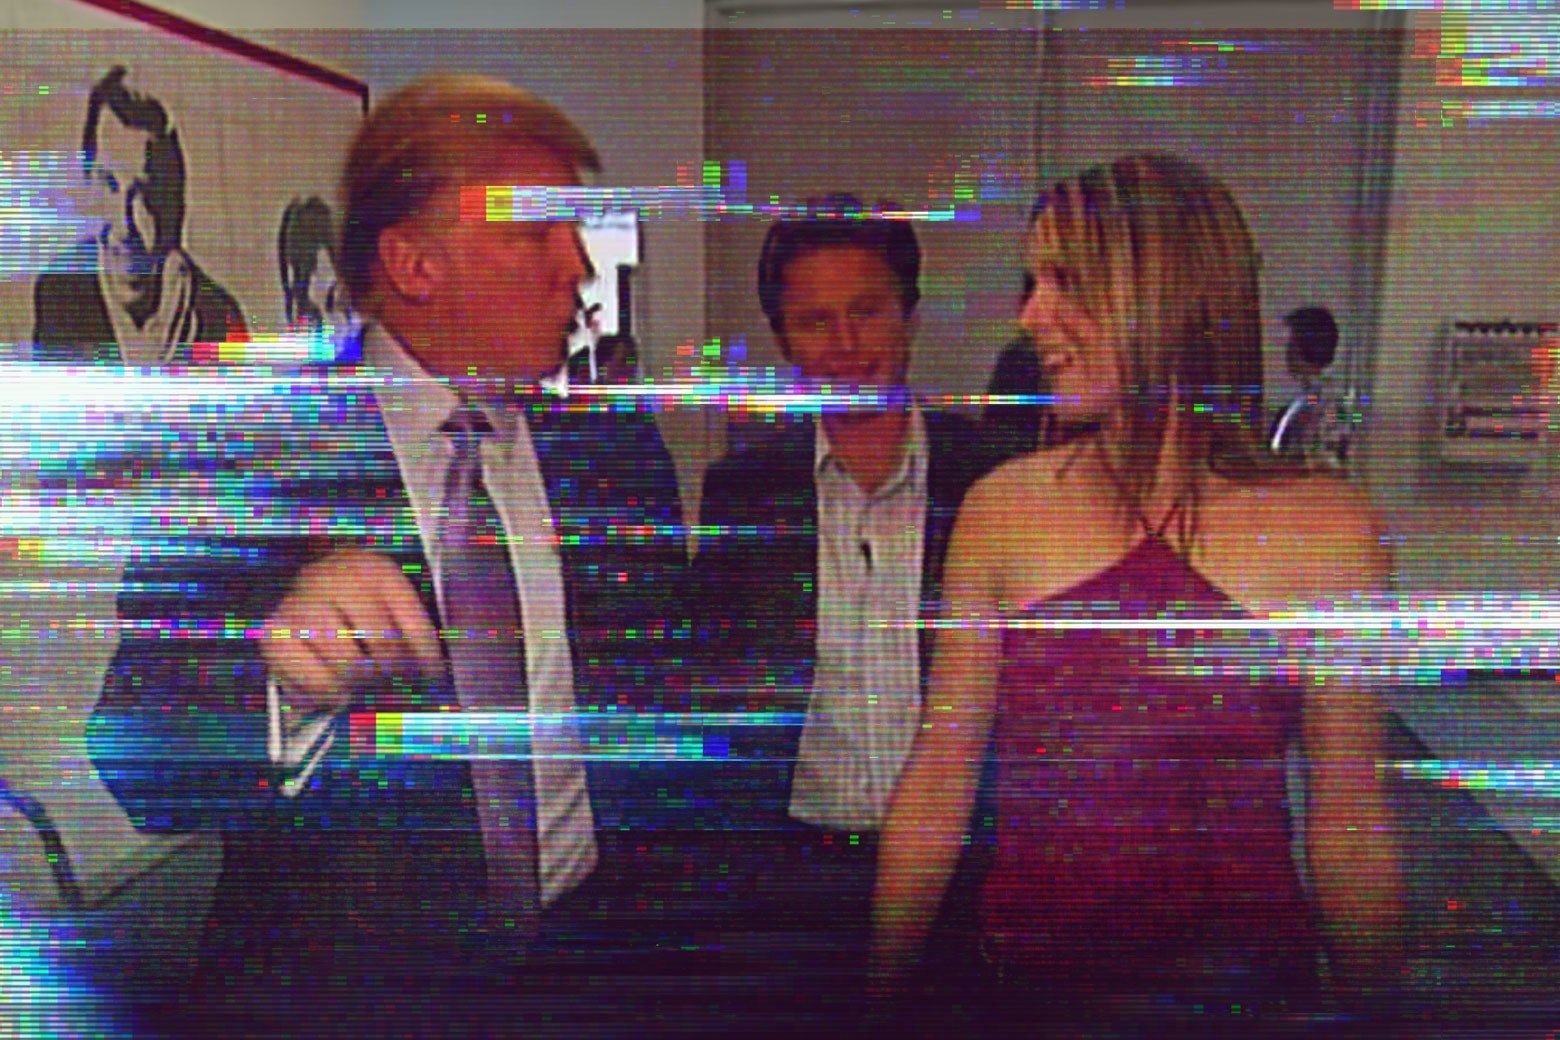 Donald Trump talks to a woman with Billy Bush behind them in the Access Hollywood tape